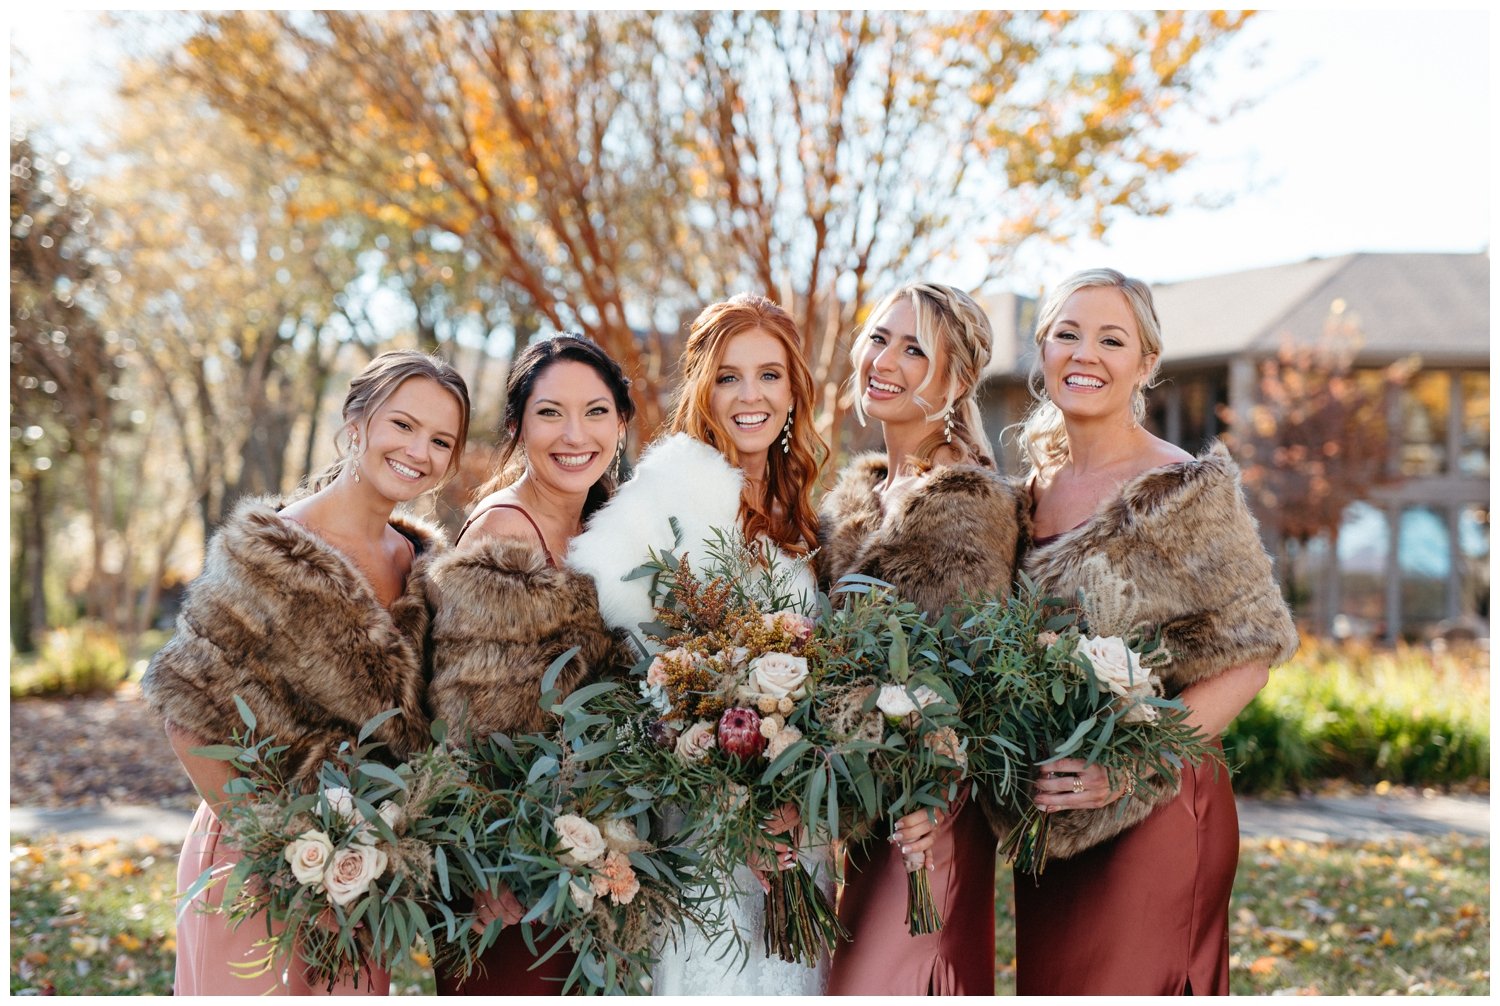 The bride and bridesmaids hold their bouquets